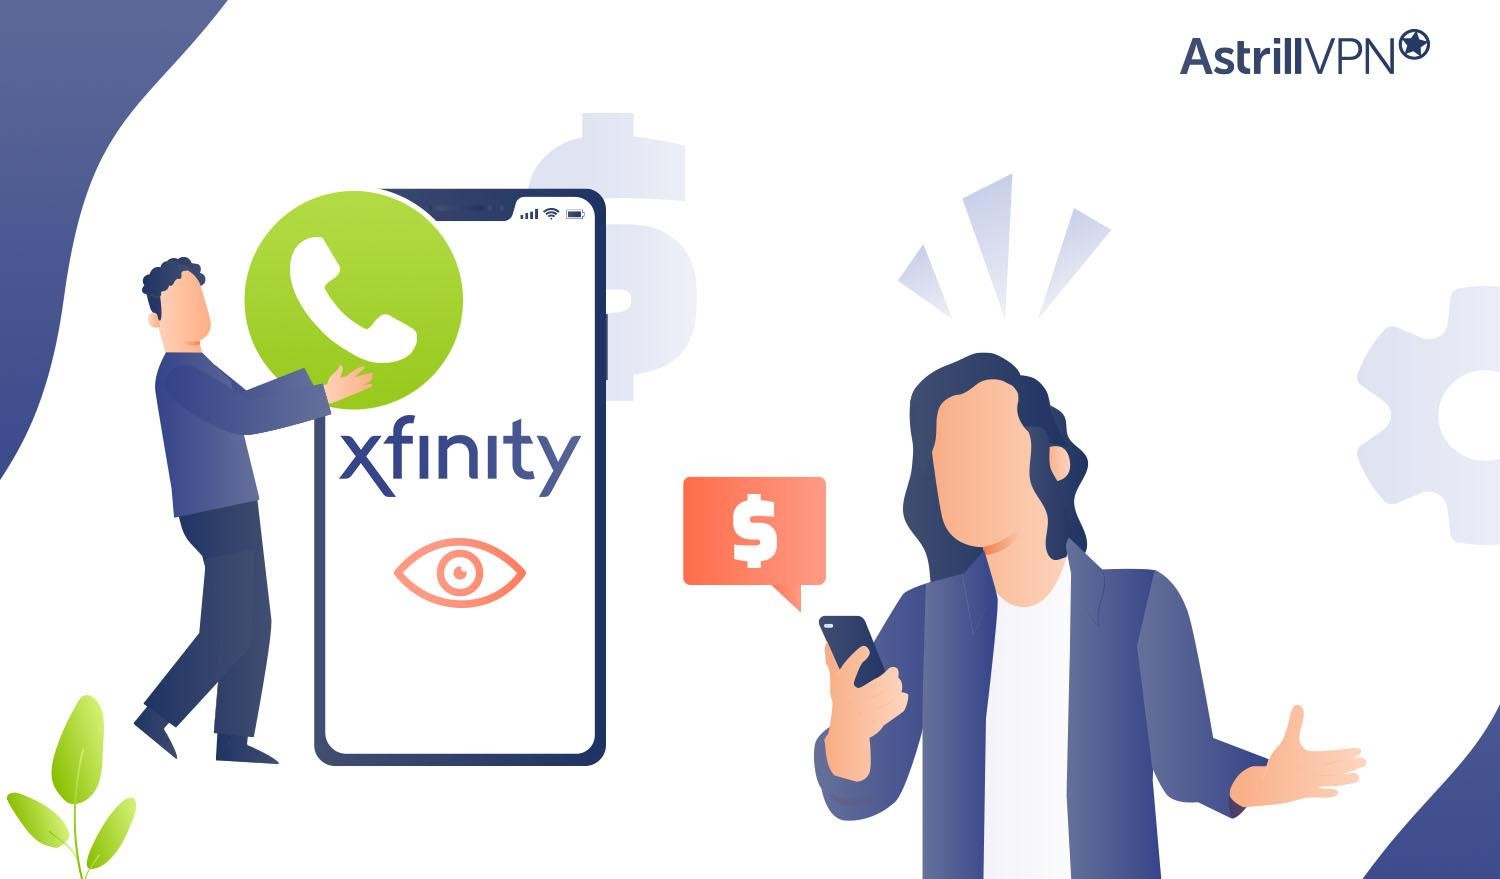 Watch Out for “Xfinity” Calls Demanding Payment